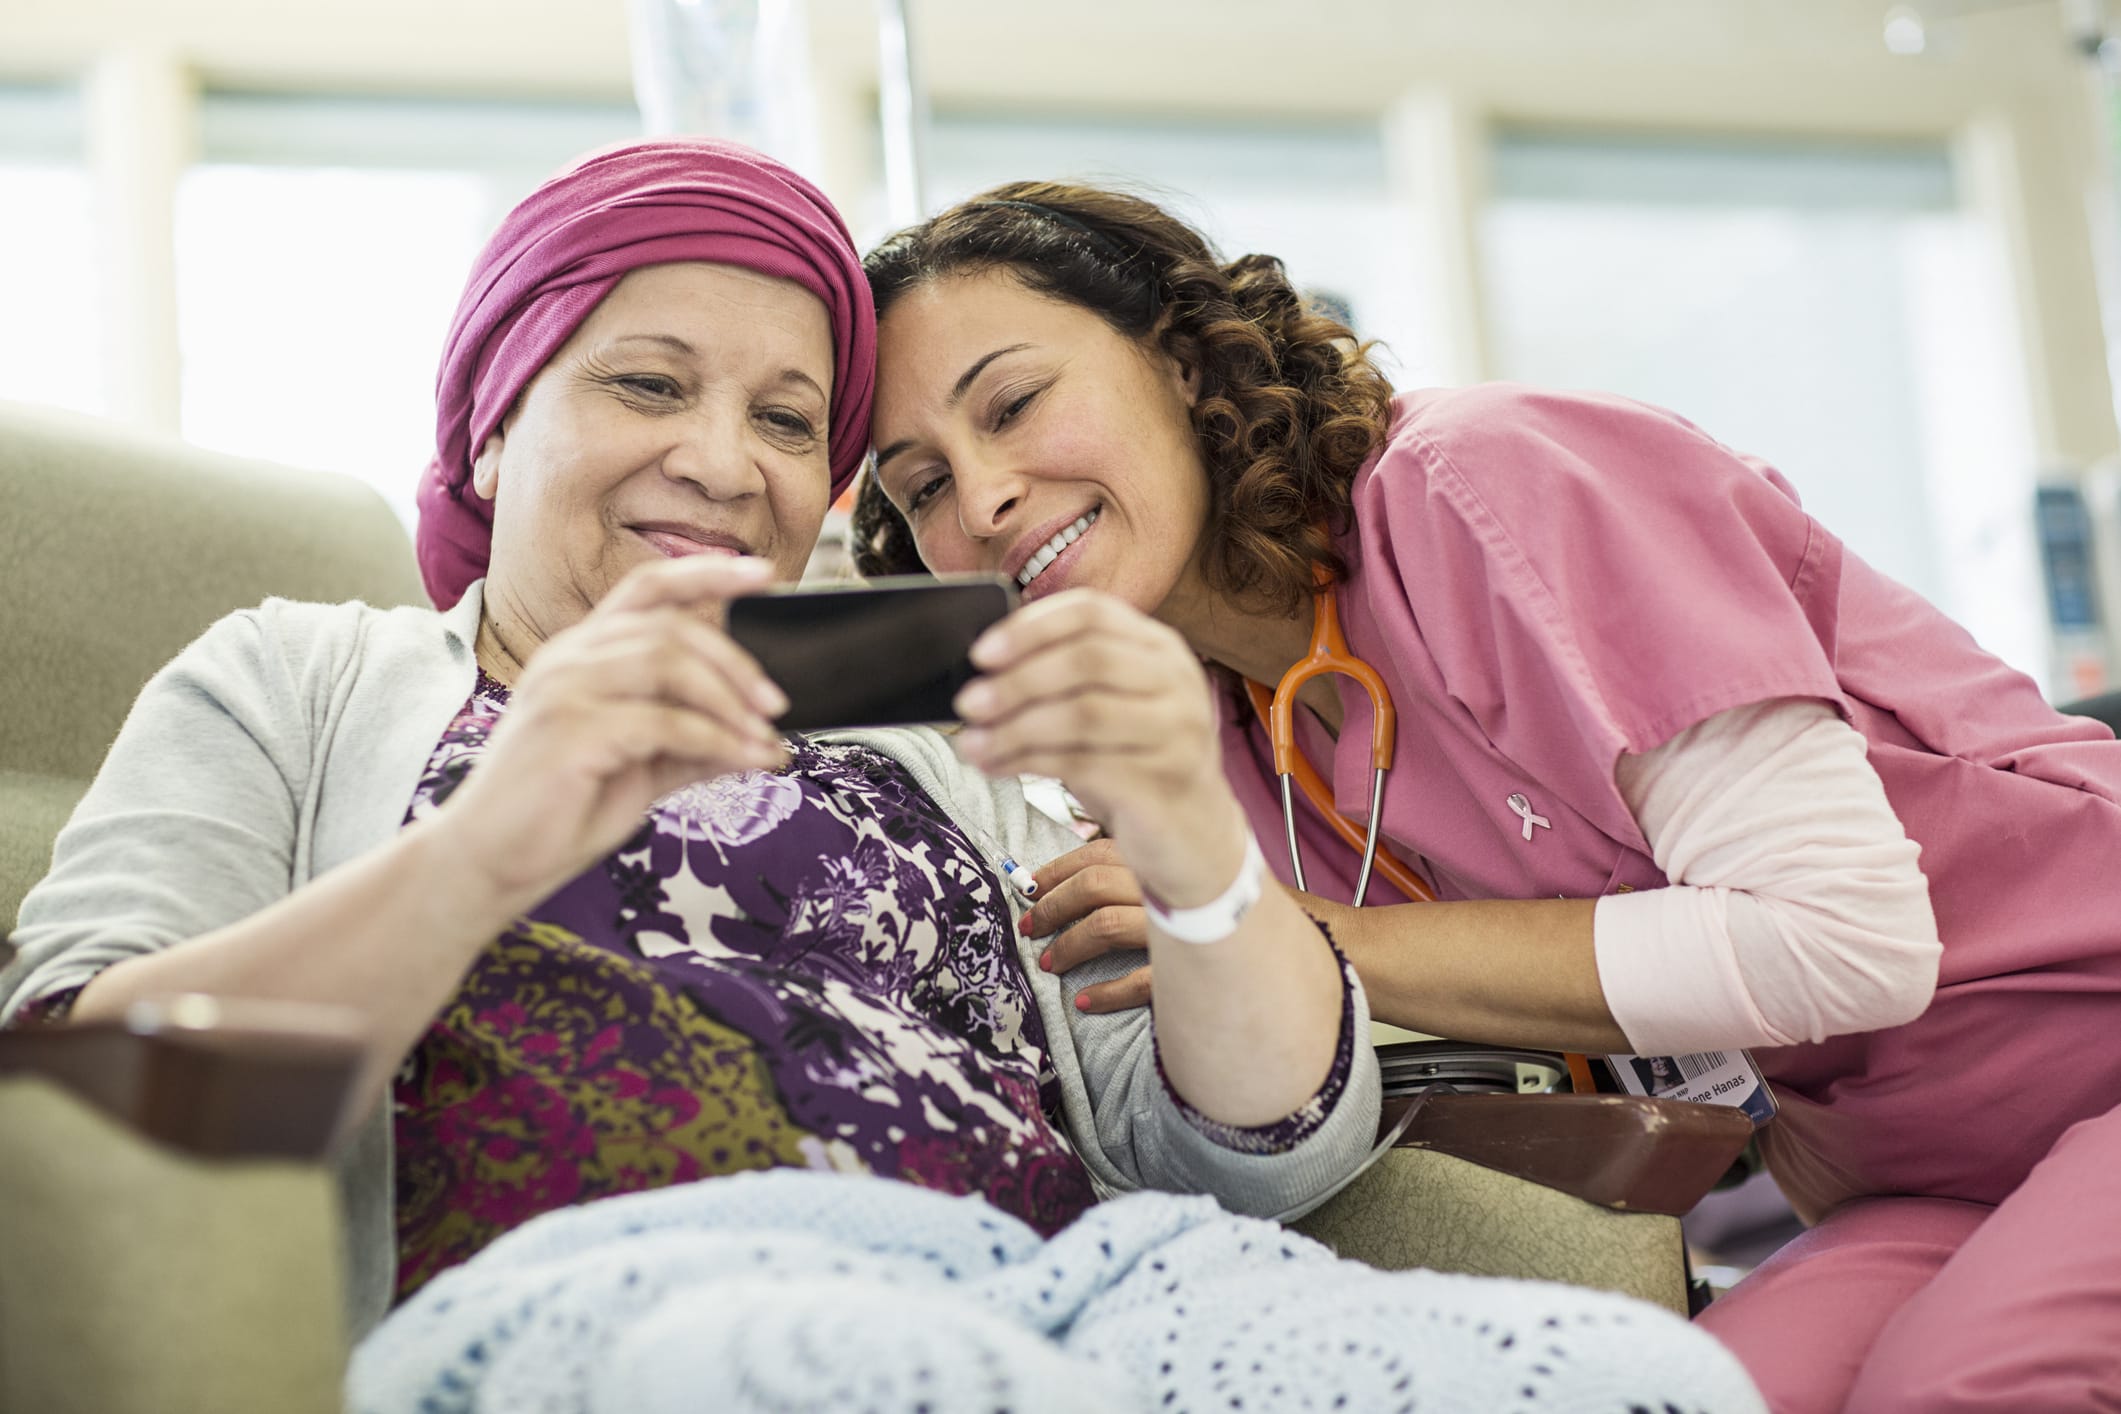 A patient receiving chemotherapy and a cancer treatment specialist look at photos on a phone together 